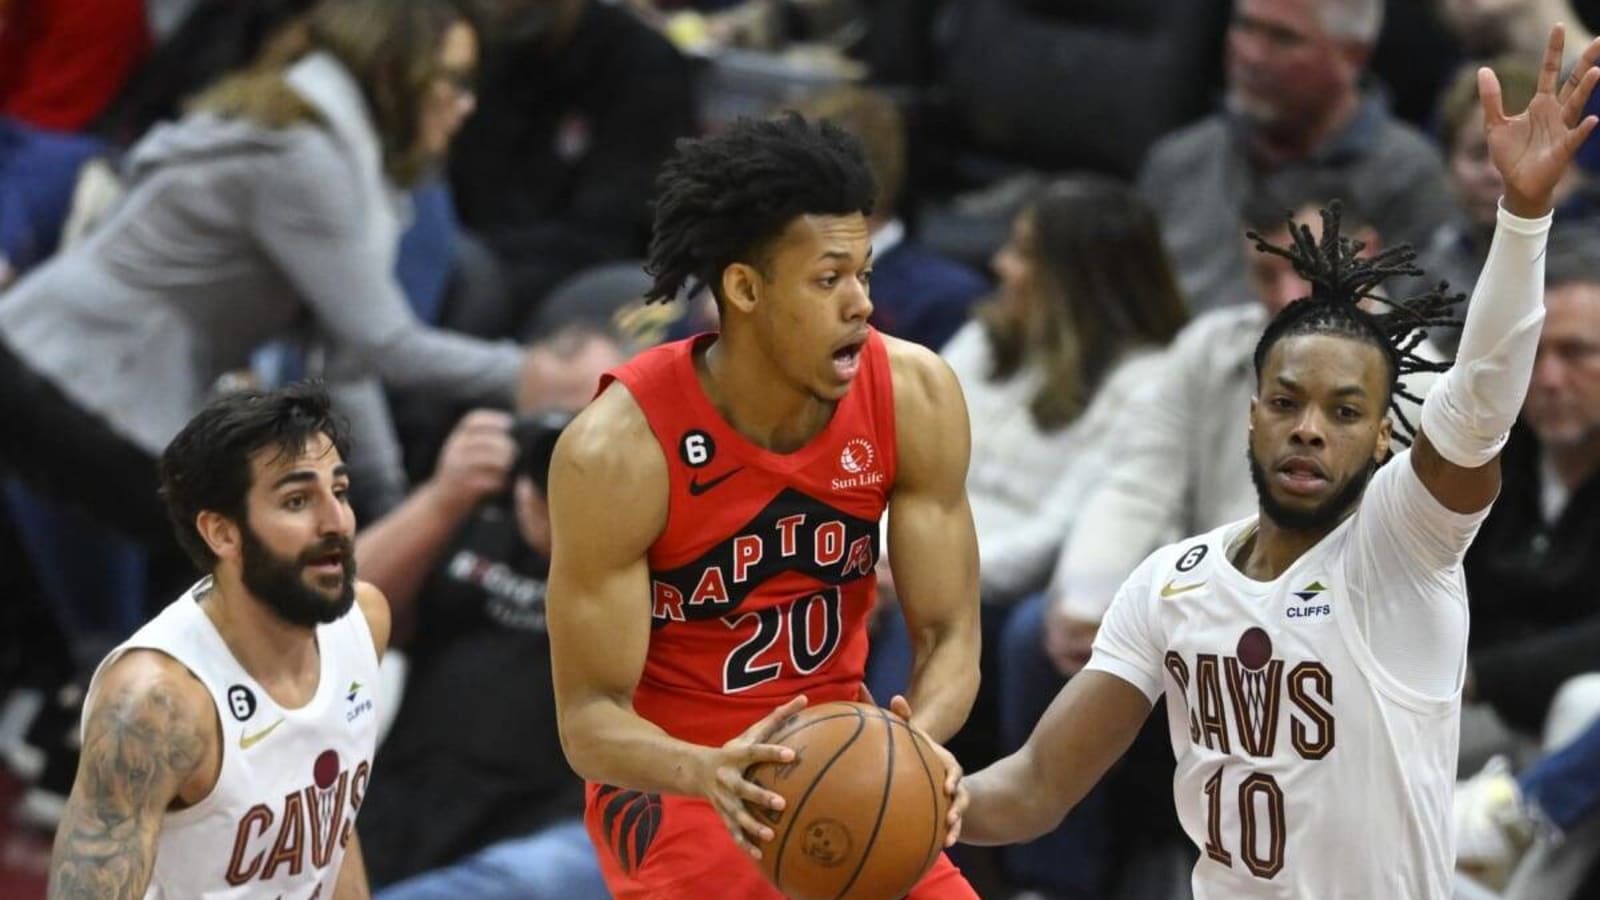 The Jeff Dowtin Jr. Situation is an Awkward Look For the Raptors